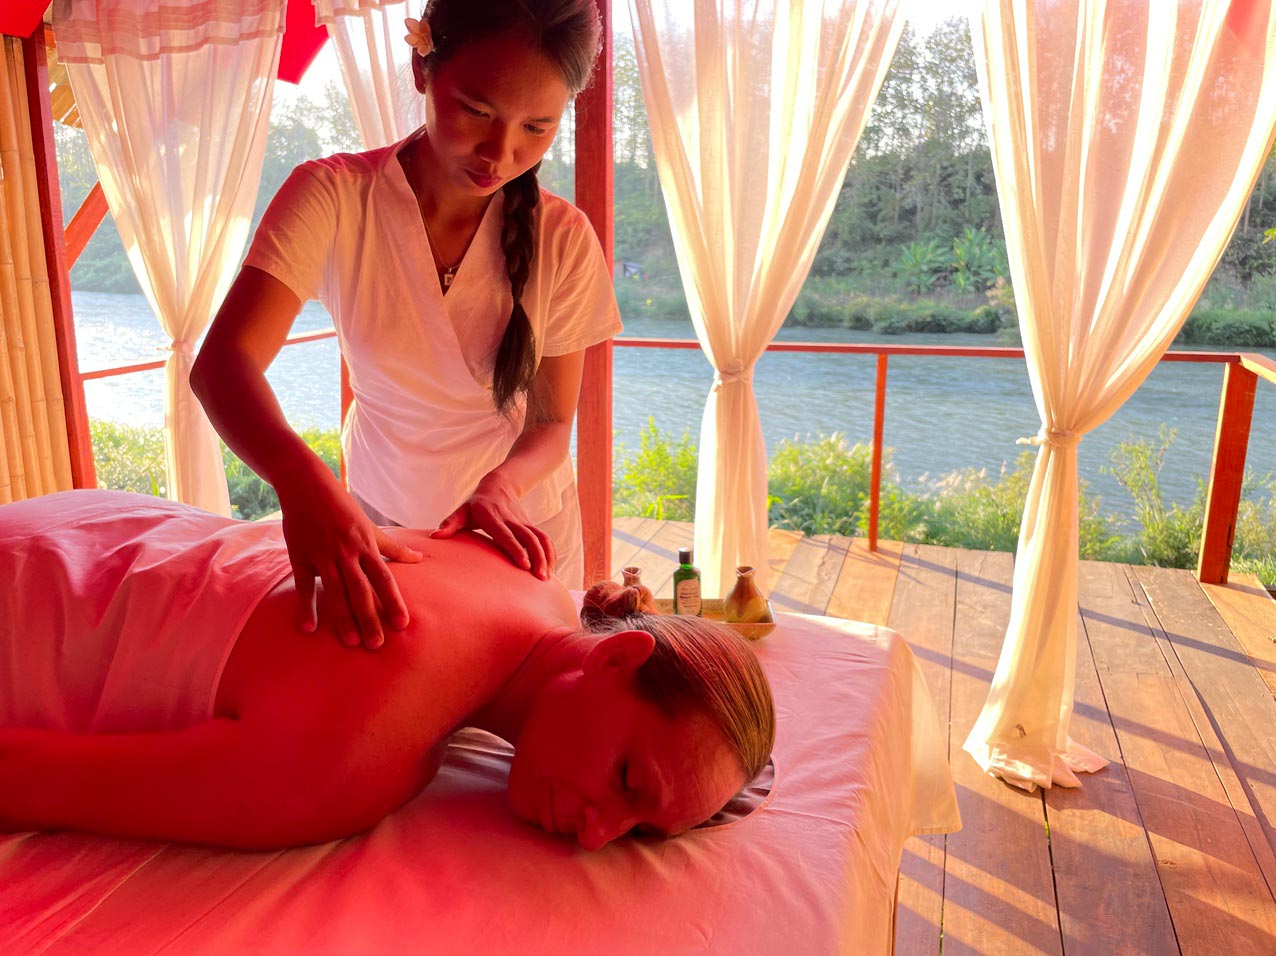 A woman receiving a soothing spa massage on a bed alongside a serene river.